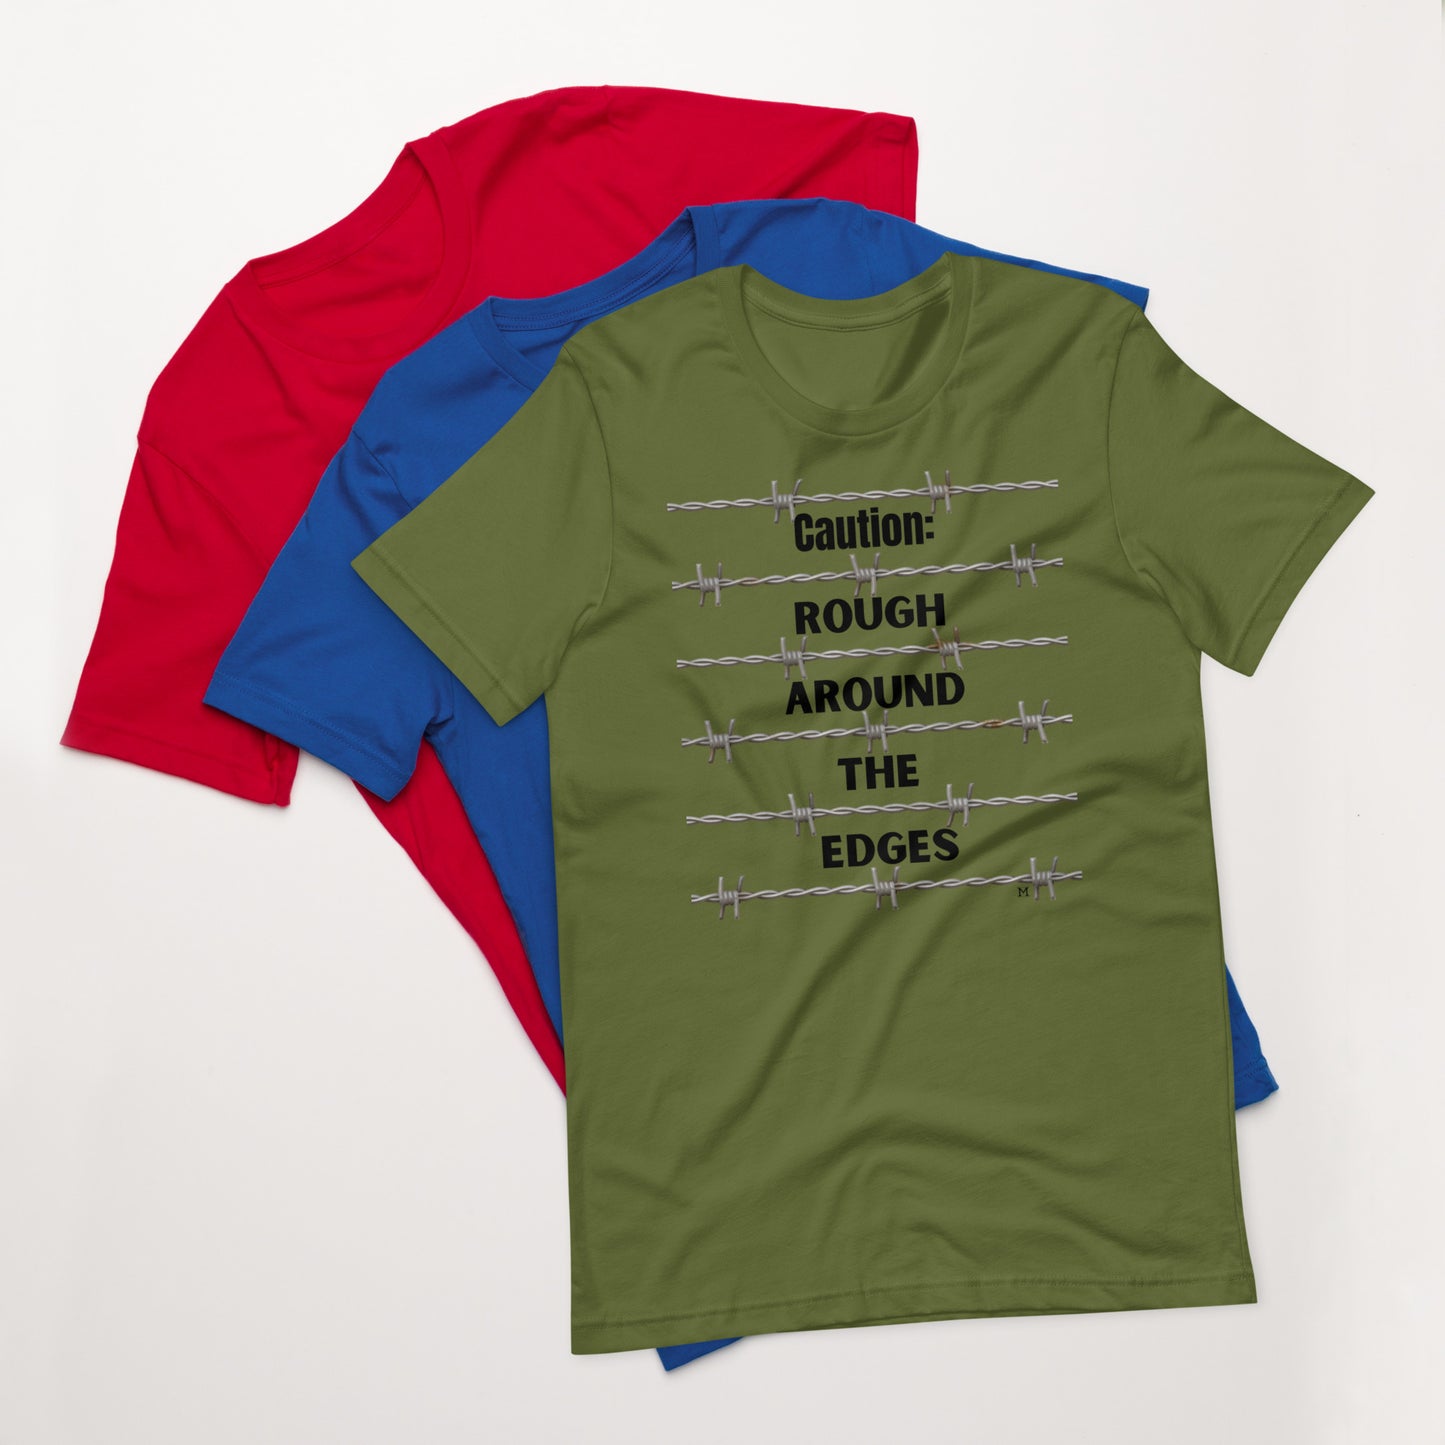 Caution: Know Someone Who Is Rough Around The Edges? MII Designs Unisex t-shirt